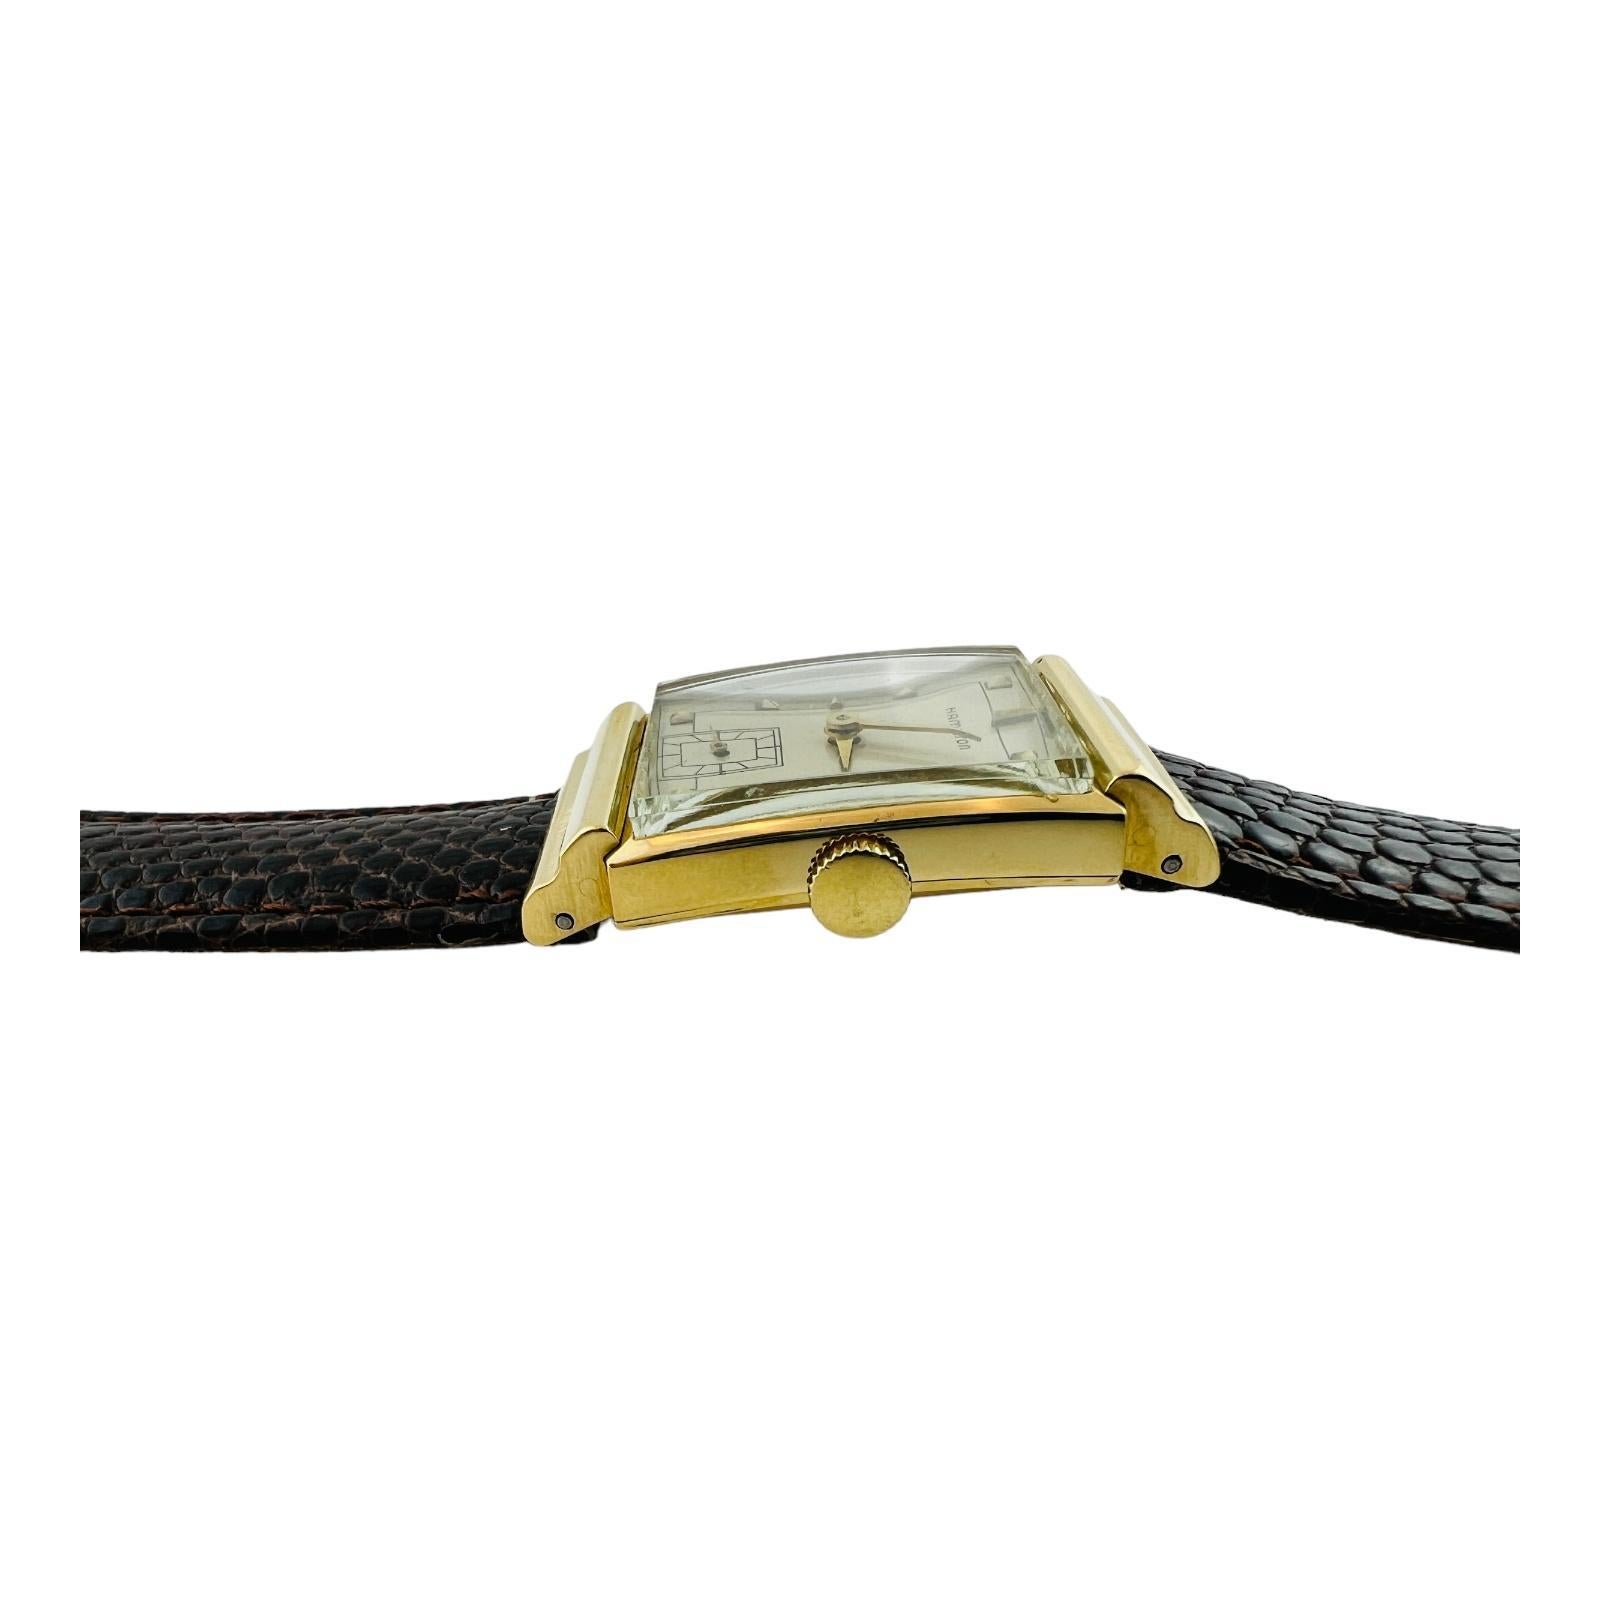 1940's Hamilton Gordon Men's Watch'

This vintage Hamilton men's watch is set in 18K yellow gold.

Case is approx. 22mm x 37mm

Hand winding movement

Silver Dial 

Gold pyramid hour markers

New brown leather lizard band - not Hamilton

Original